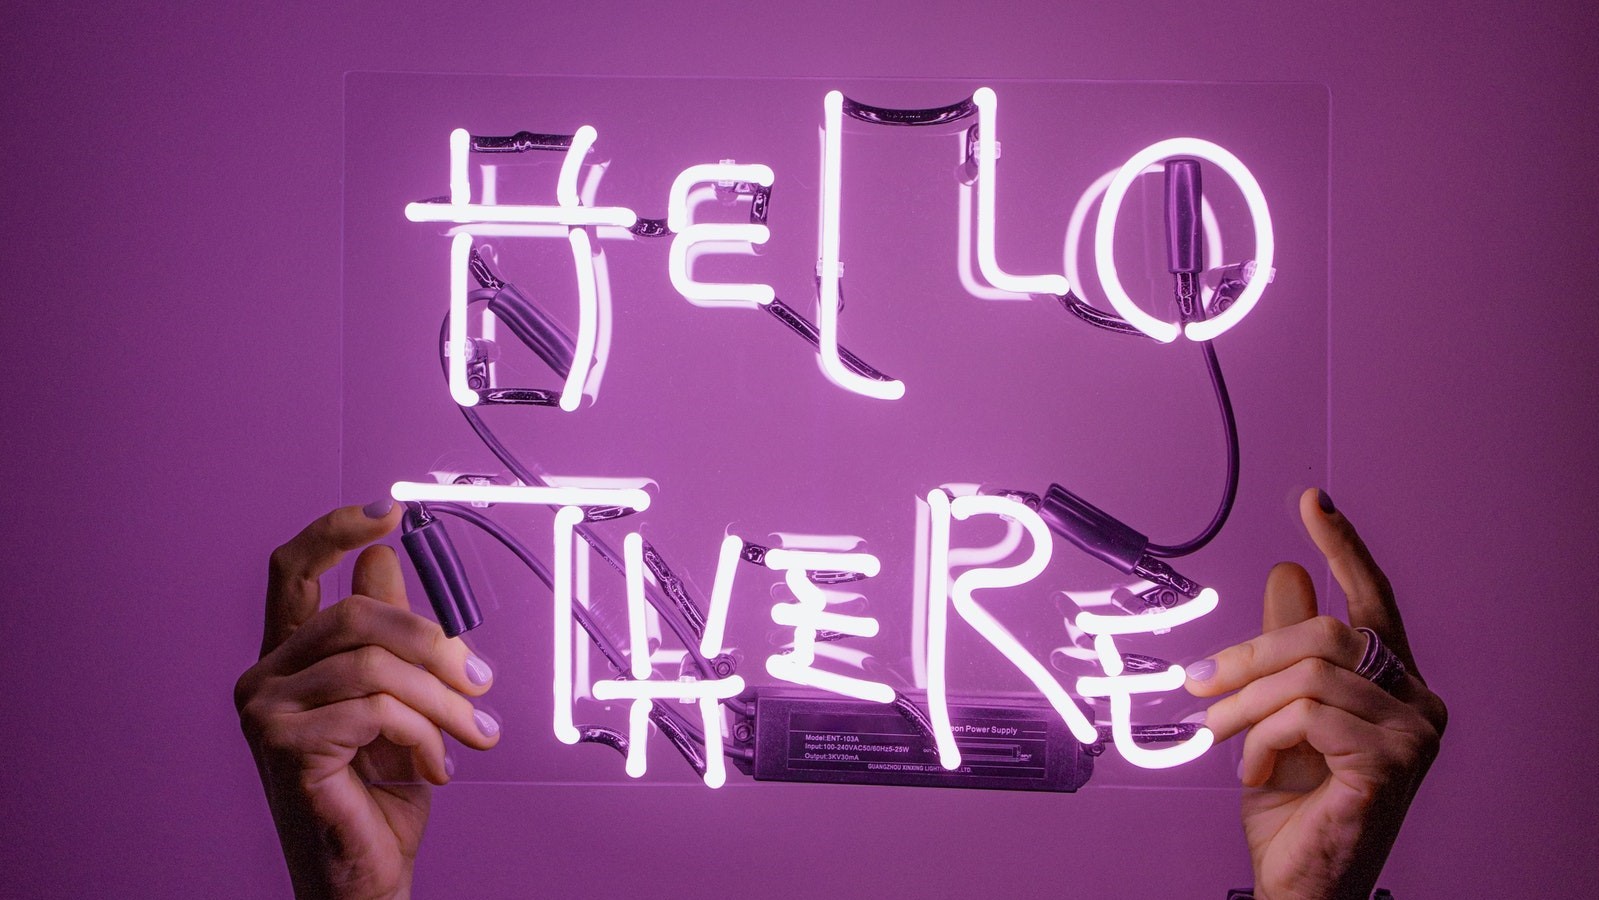 The words "hello there" written with neon lights